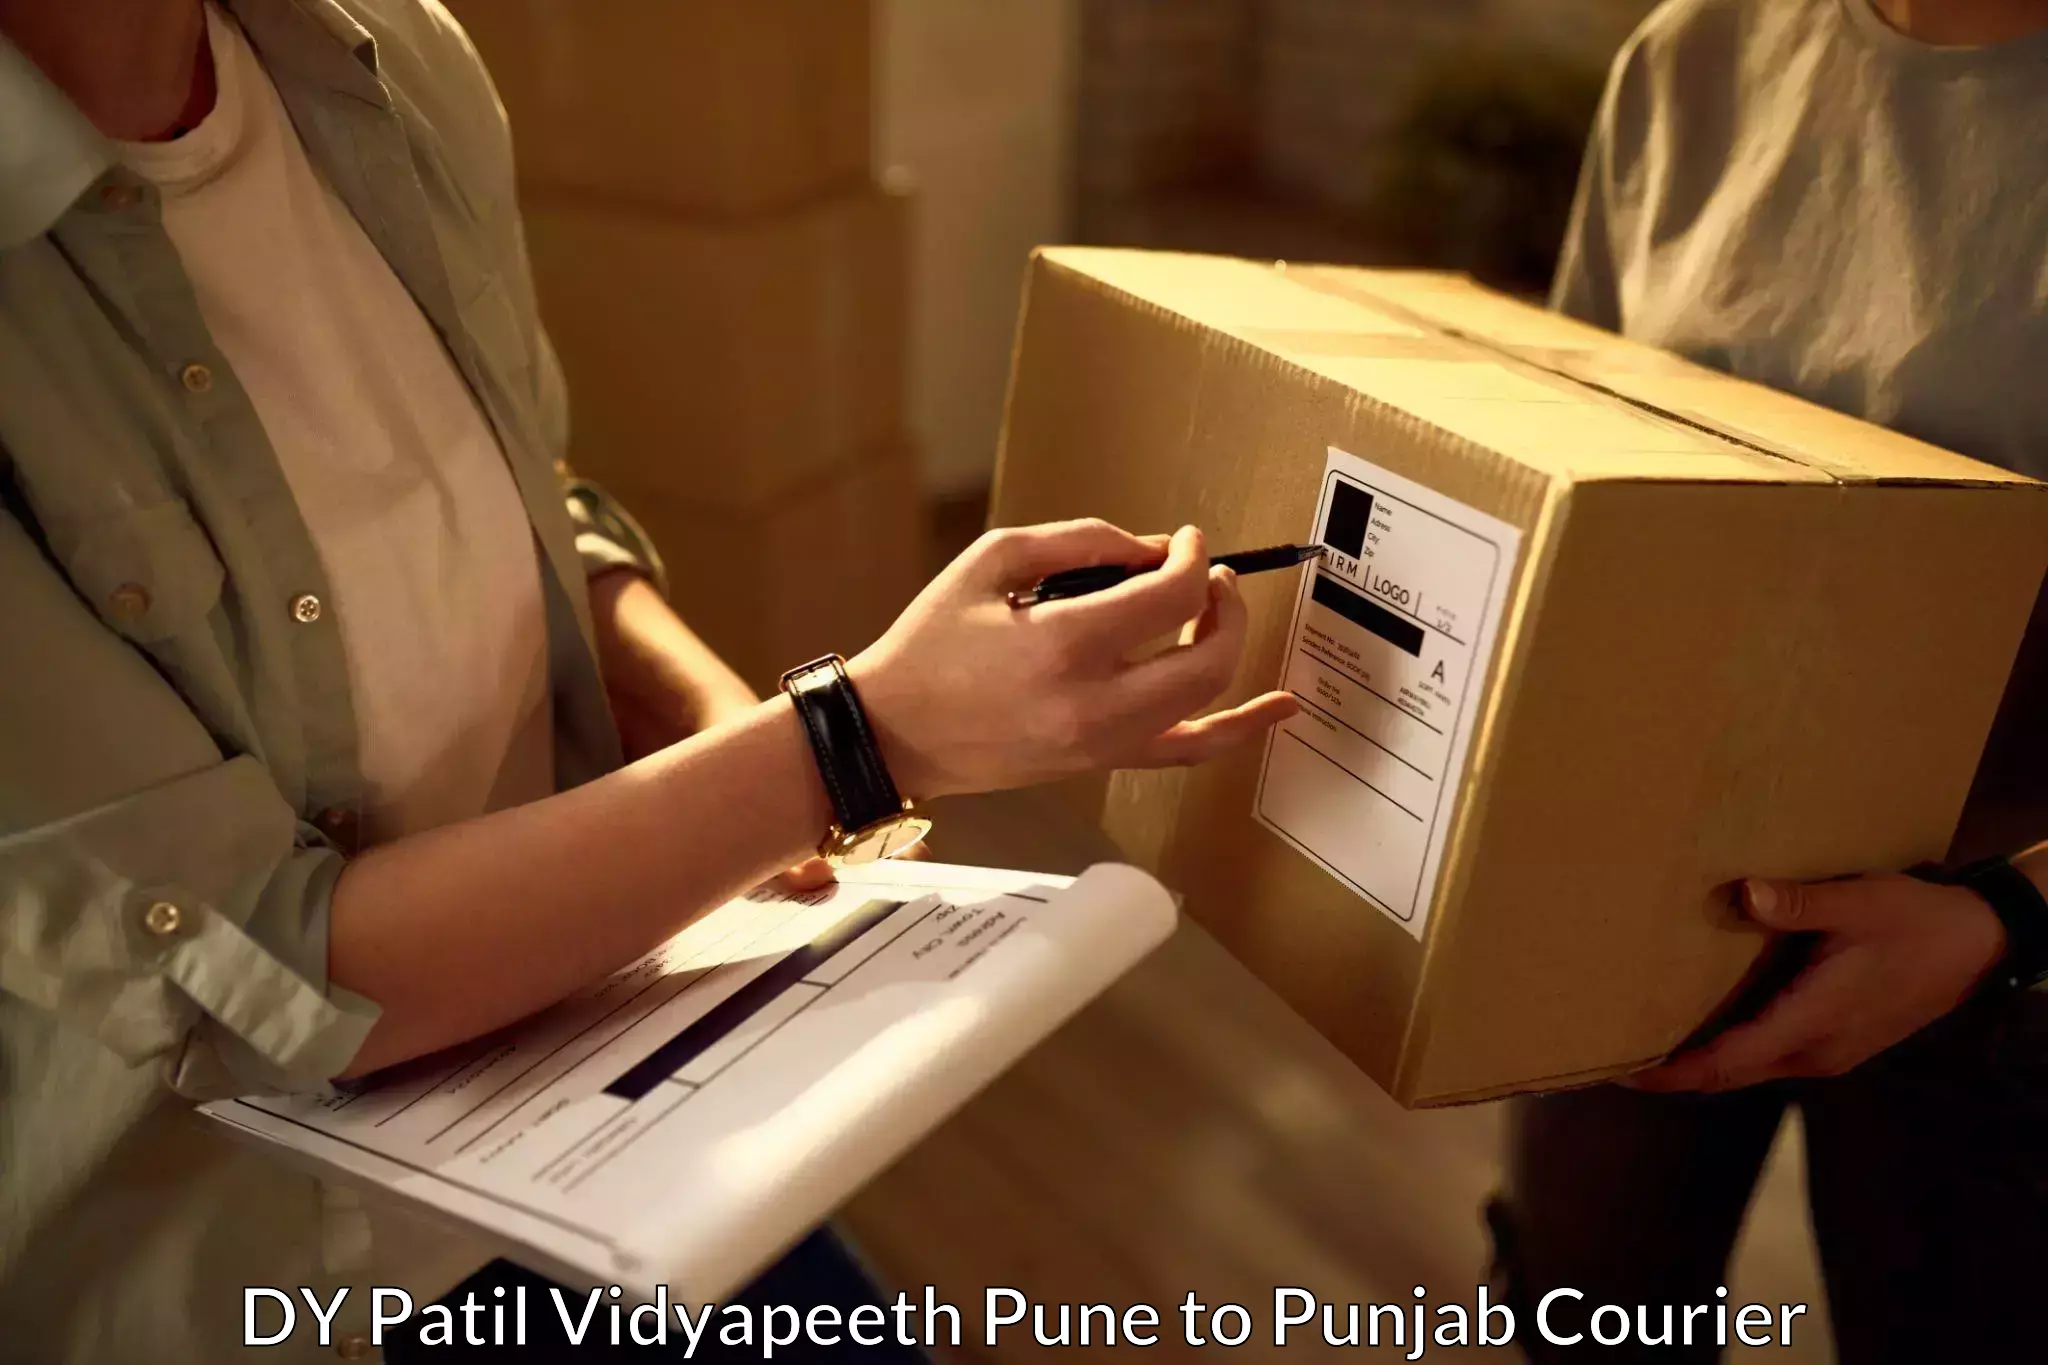 24-hour courier services in DY Patil Vidyapeeth Pune to Batala